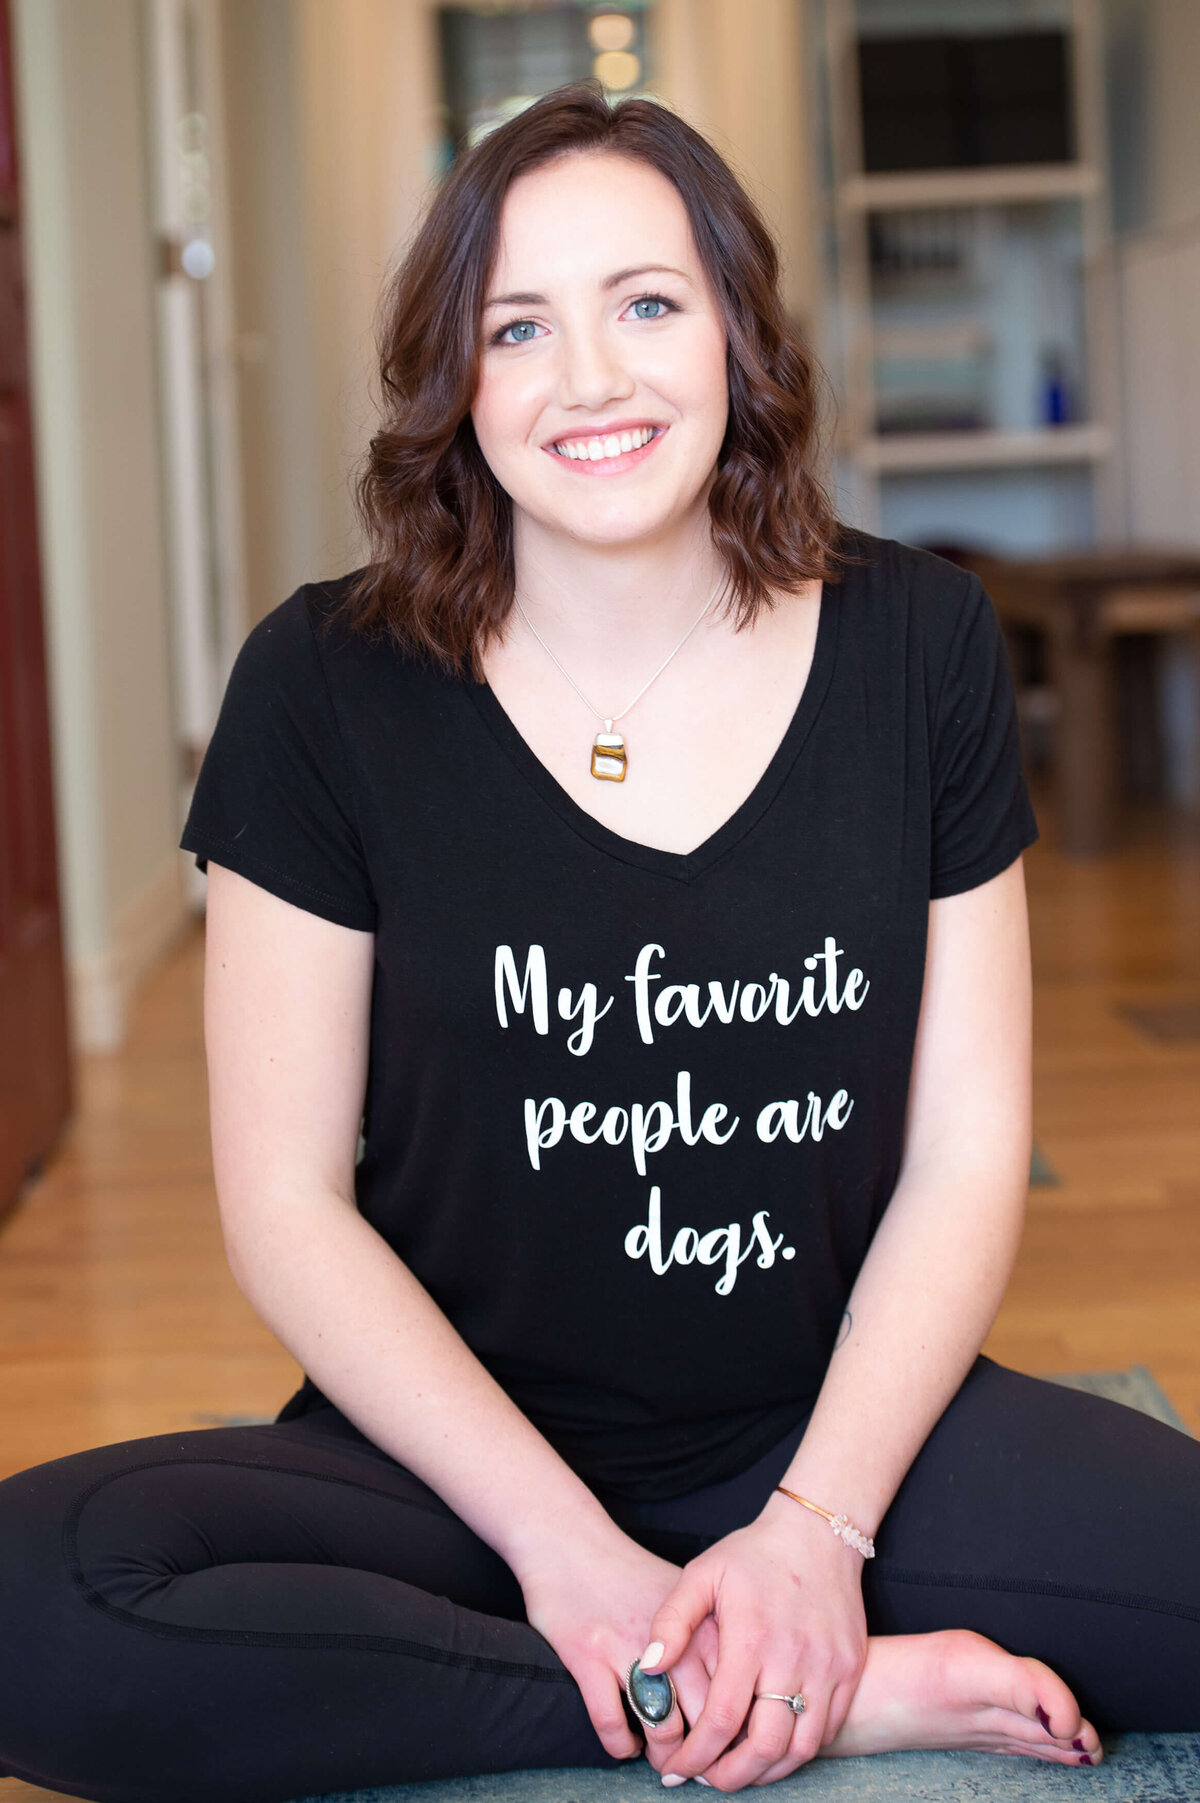 Ottawa brand photos of a yoga instructor with a funny saying on her T-shirt